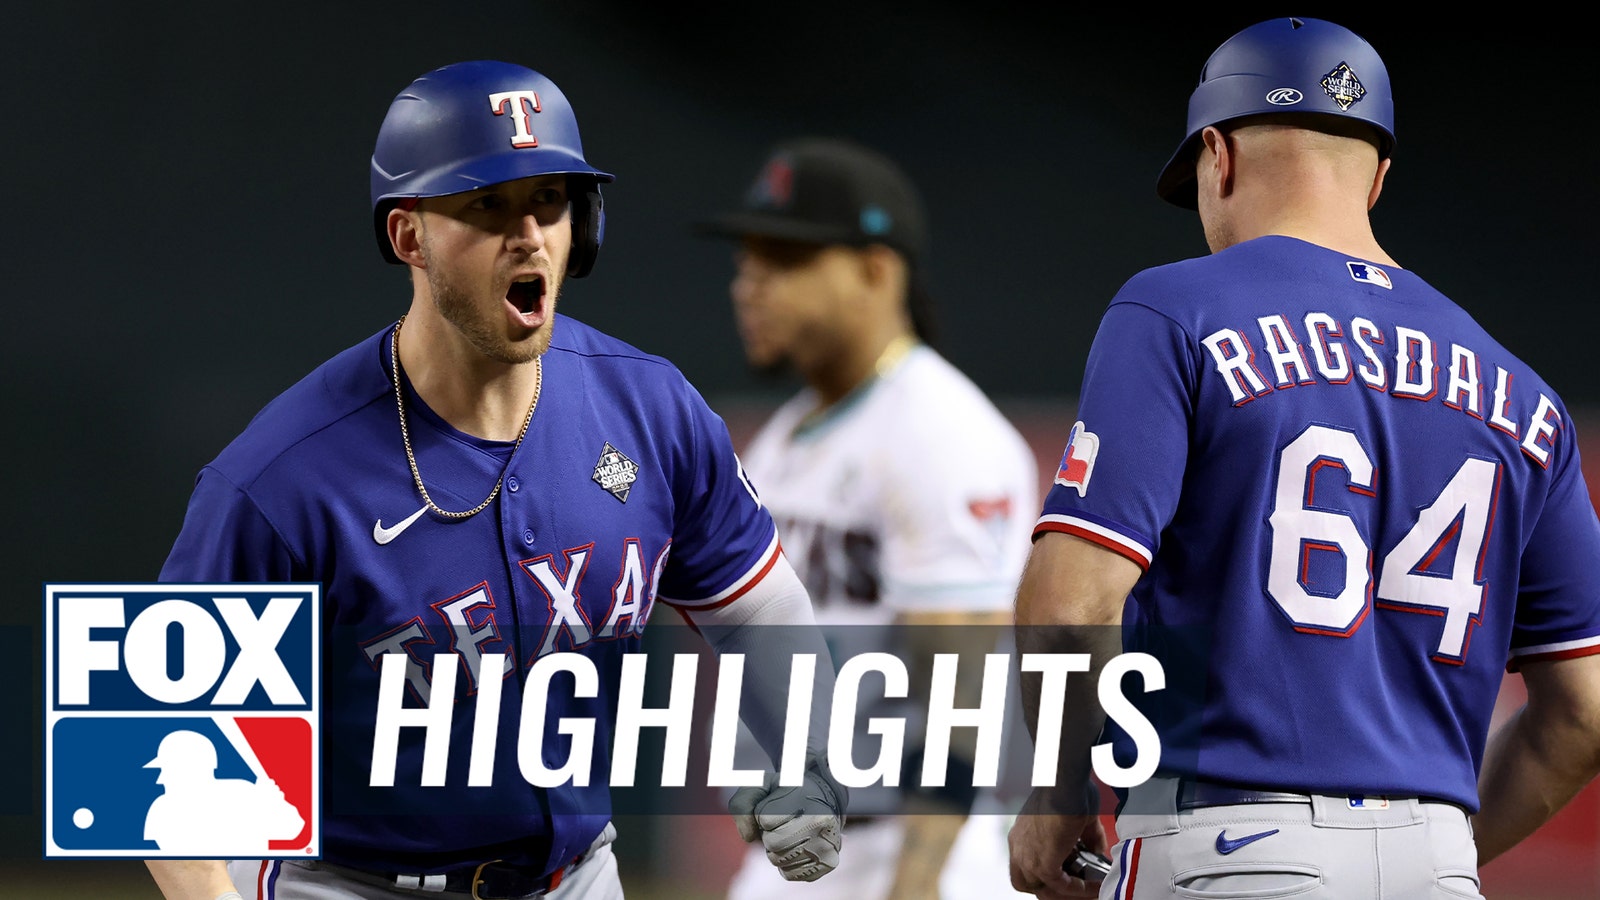 Mitch Garver hits an RBI single to give Rangers the first run of the game against Diamondbacks 